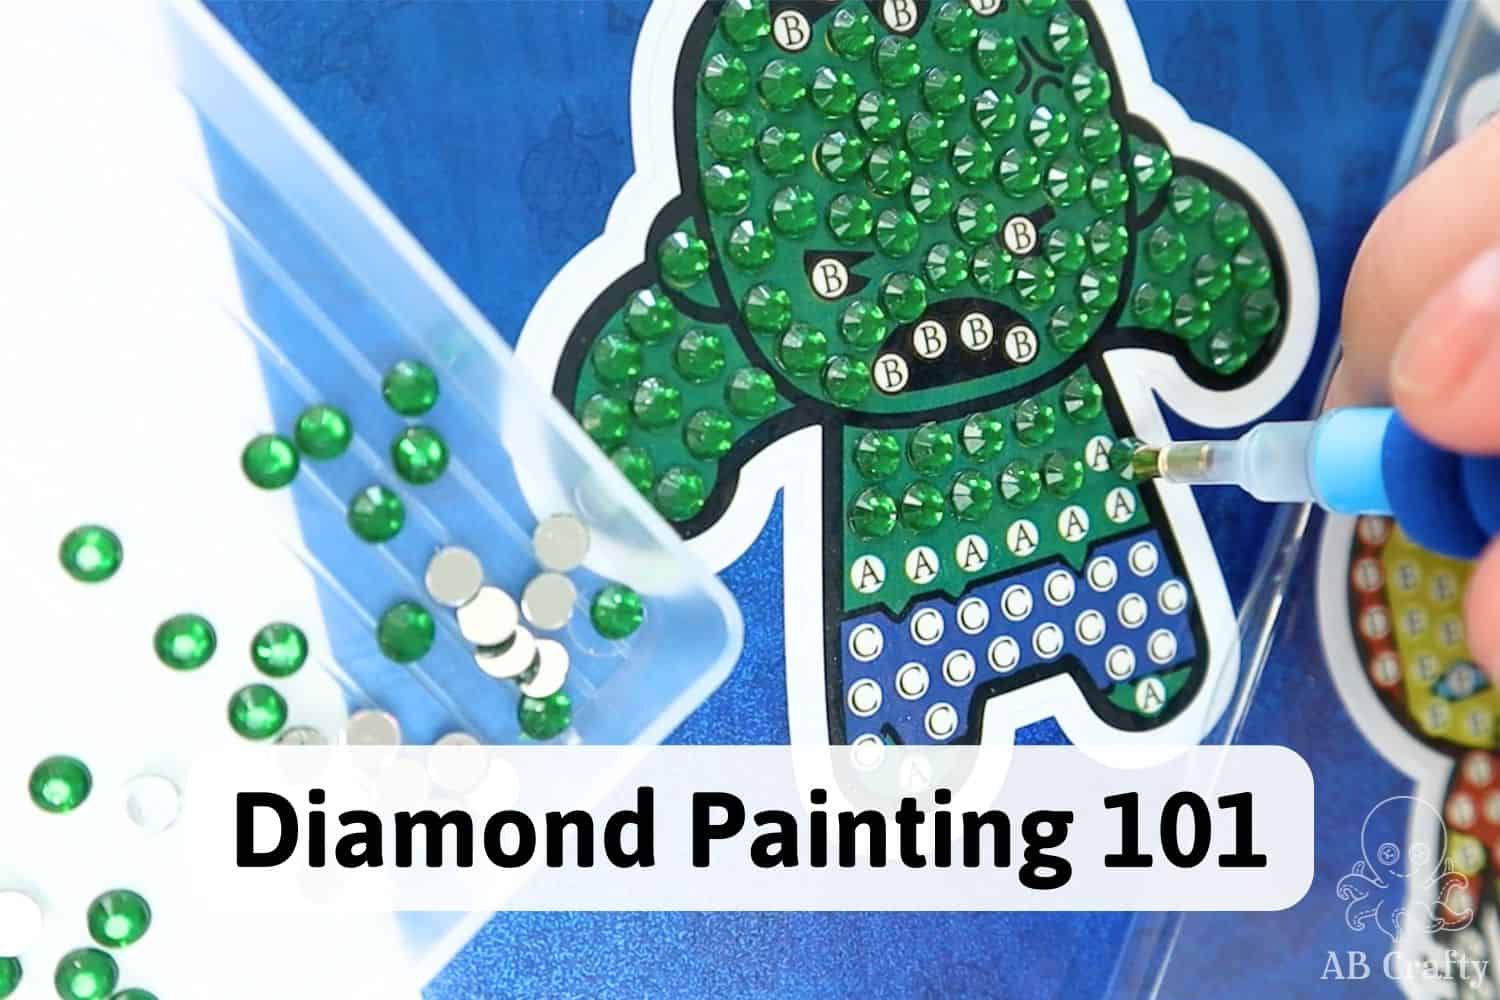 Diamond Painting Drill Pen with 6 Acrylic Tips, and Wax Storage